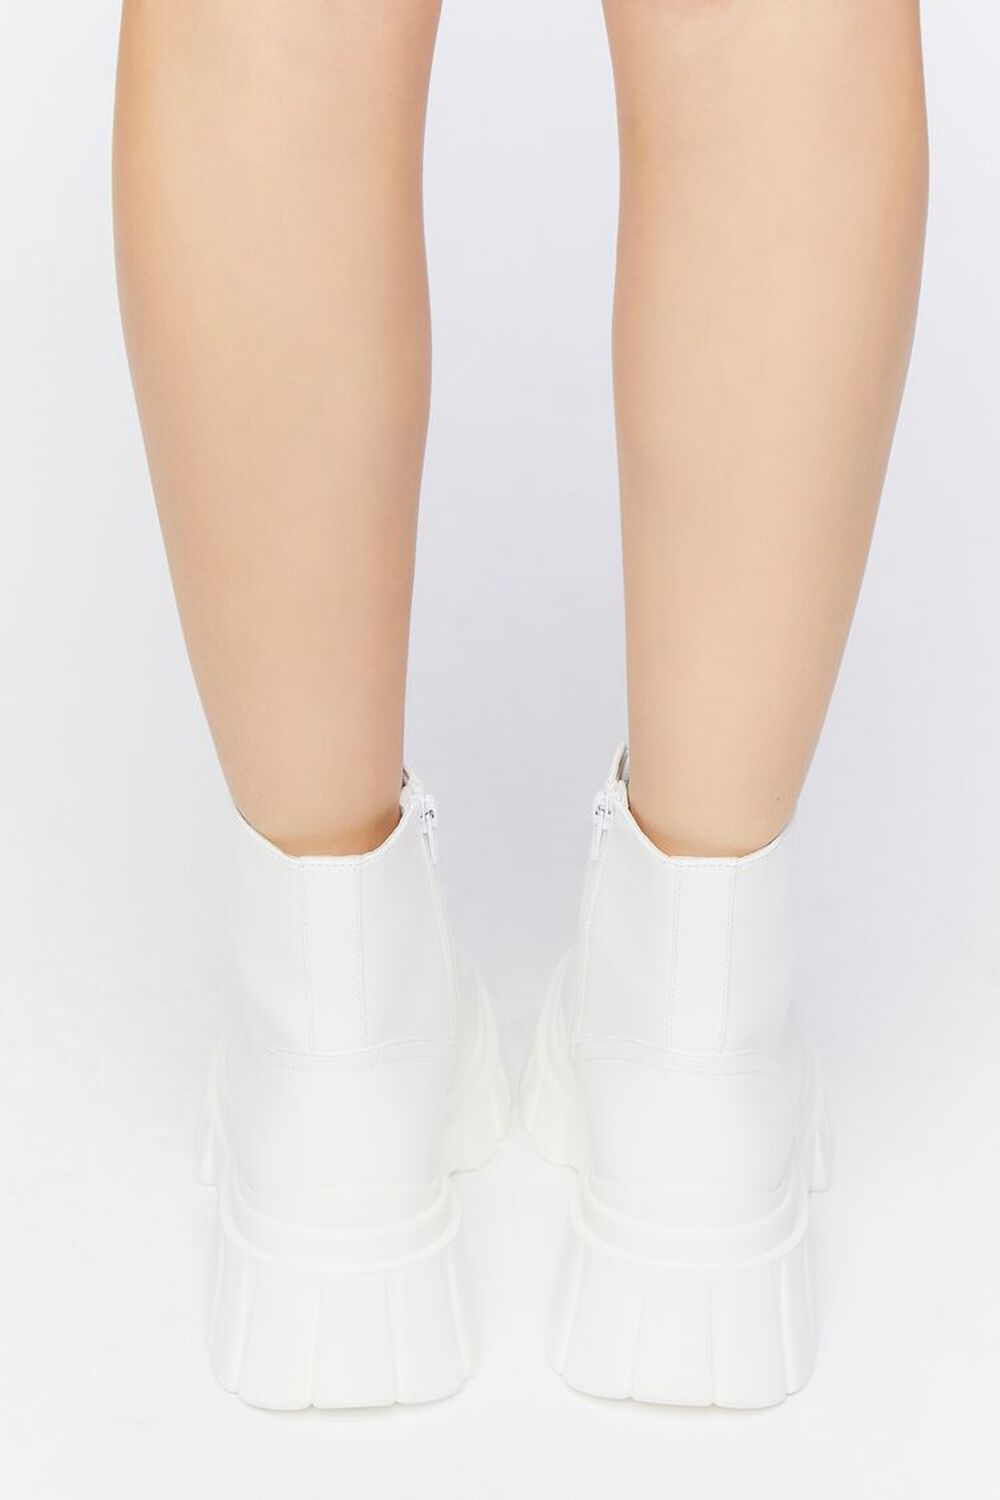 WHITE Faux Leather Lug-Sole Booties, image 3